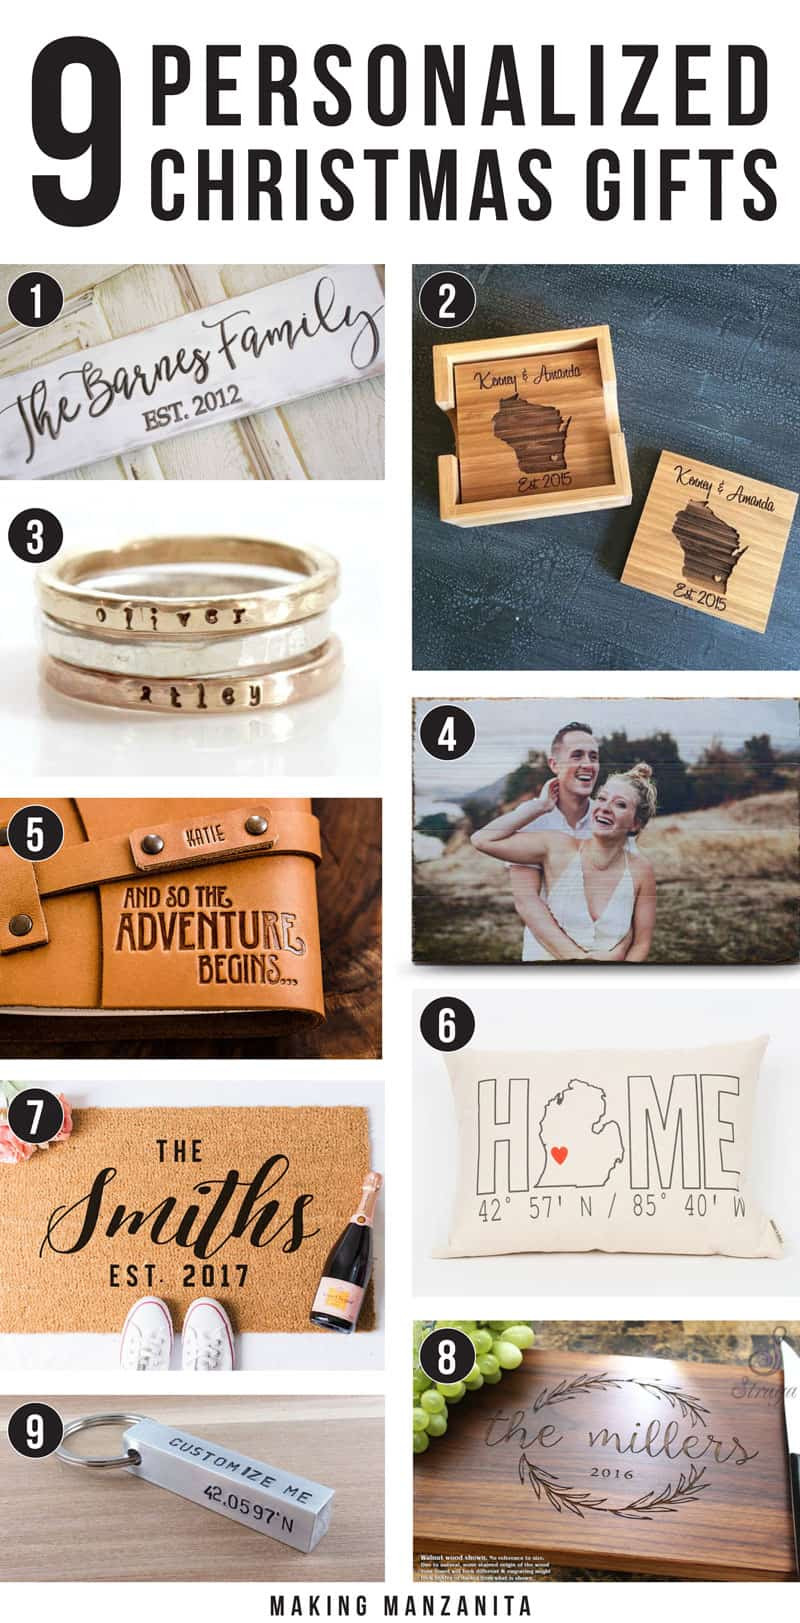 Unique Christmas Gift Ideas For Couples
 16 Awesome Personalized Christmas Gifts Making Manzanita